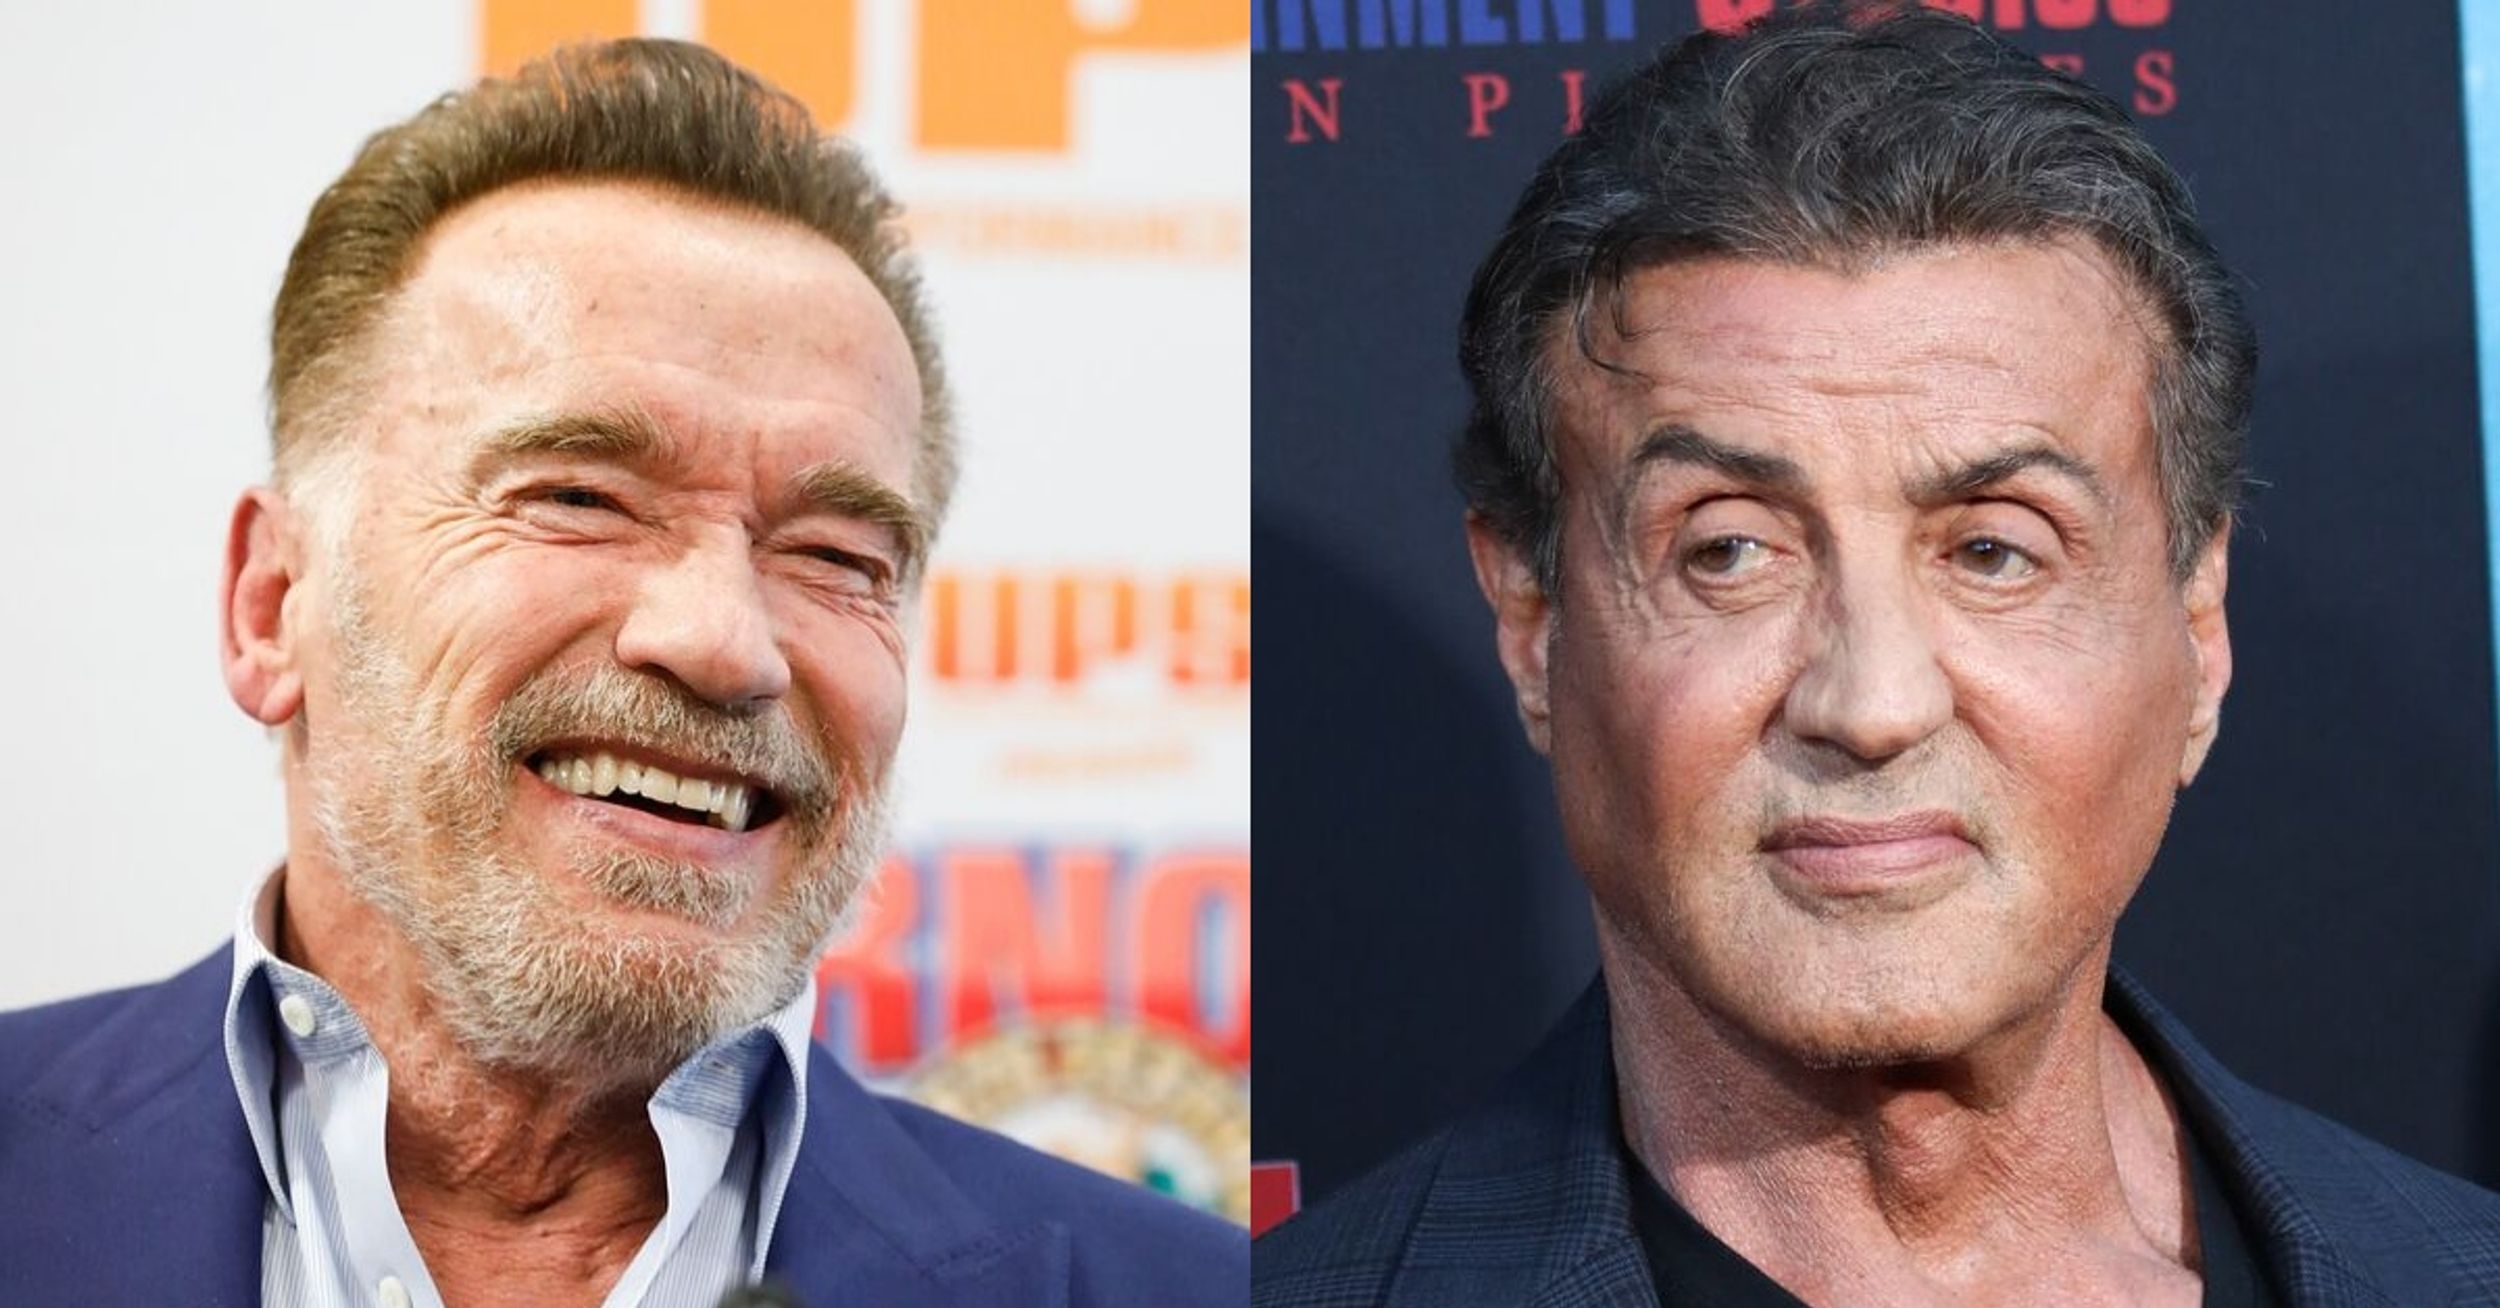 Arnold Schwarzenegger Pokes Fun At Sylvester Stallone With The Sizes Of The Knives They Signed For Charity